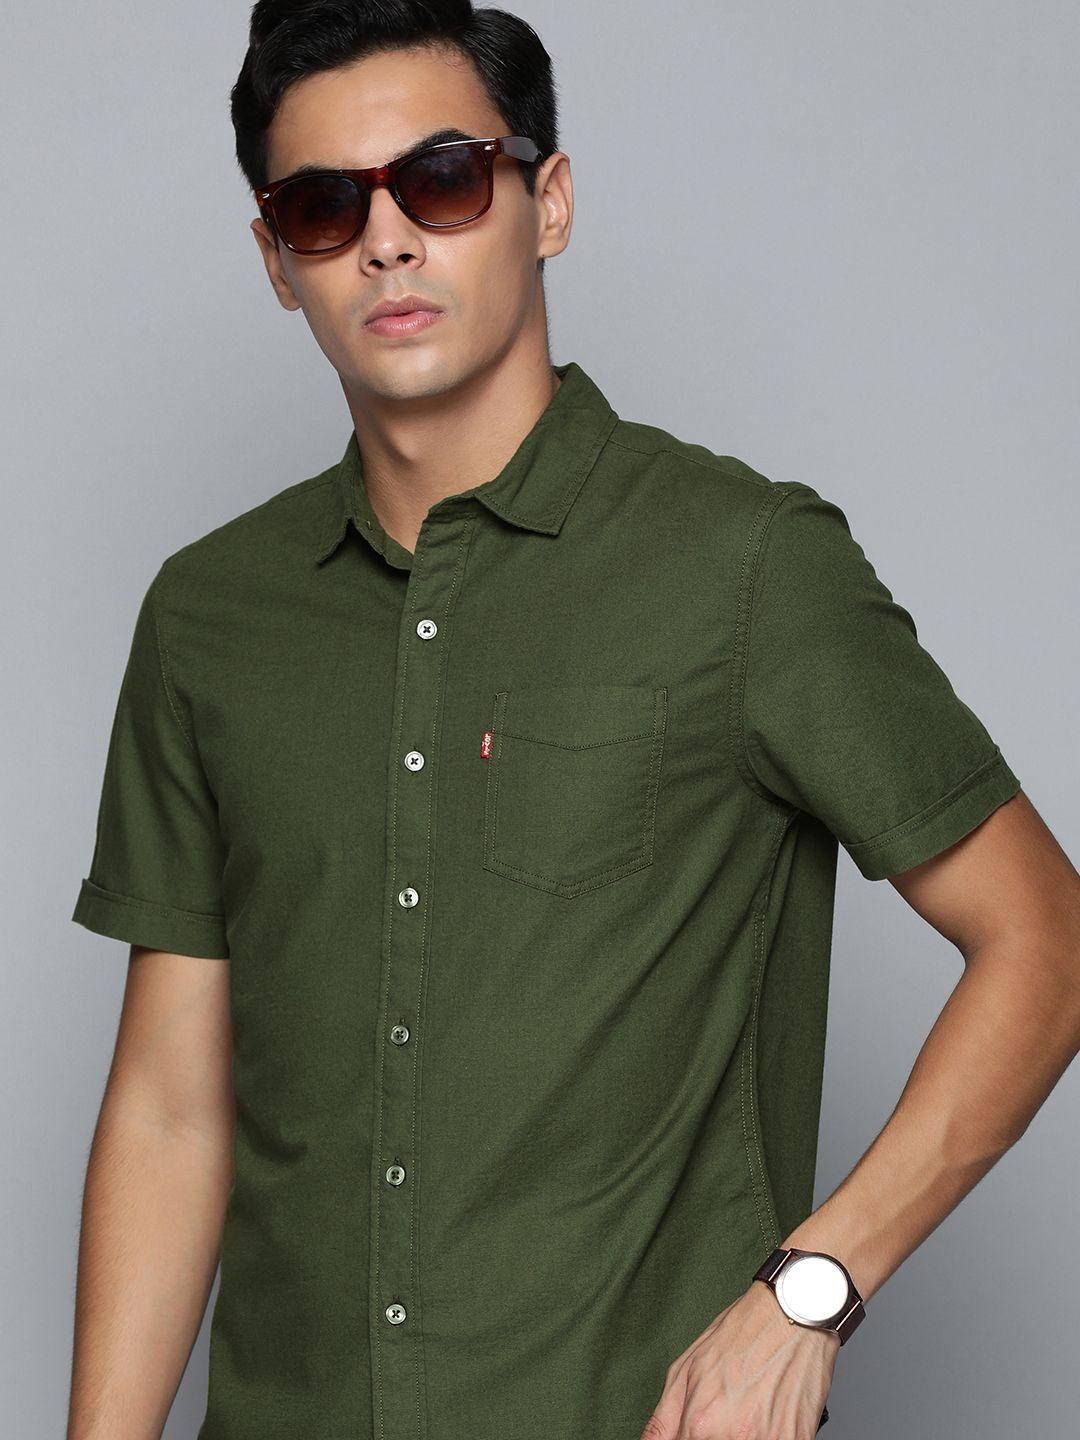 levis men dark olive green solid slim fit pure cotton casual shirt